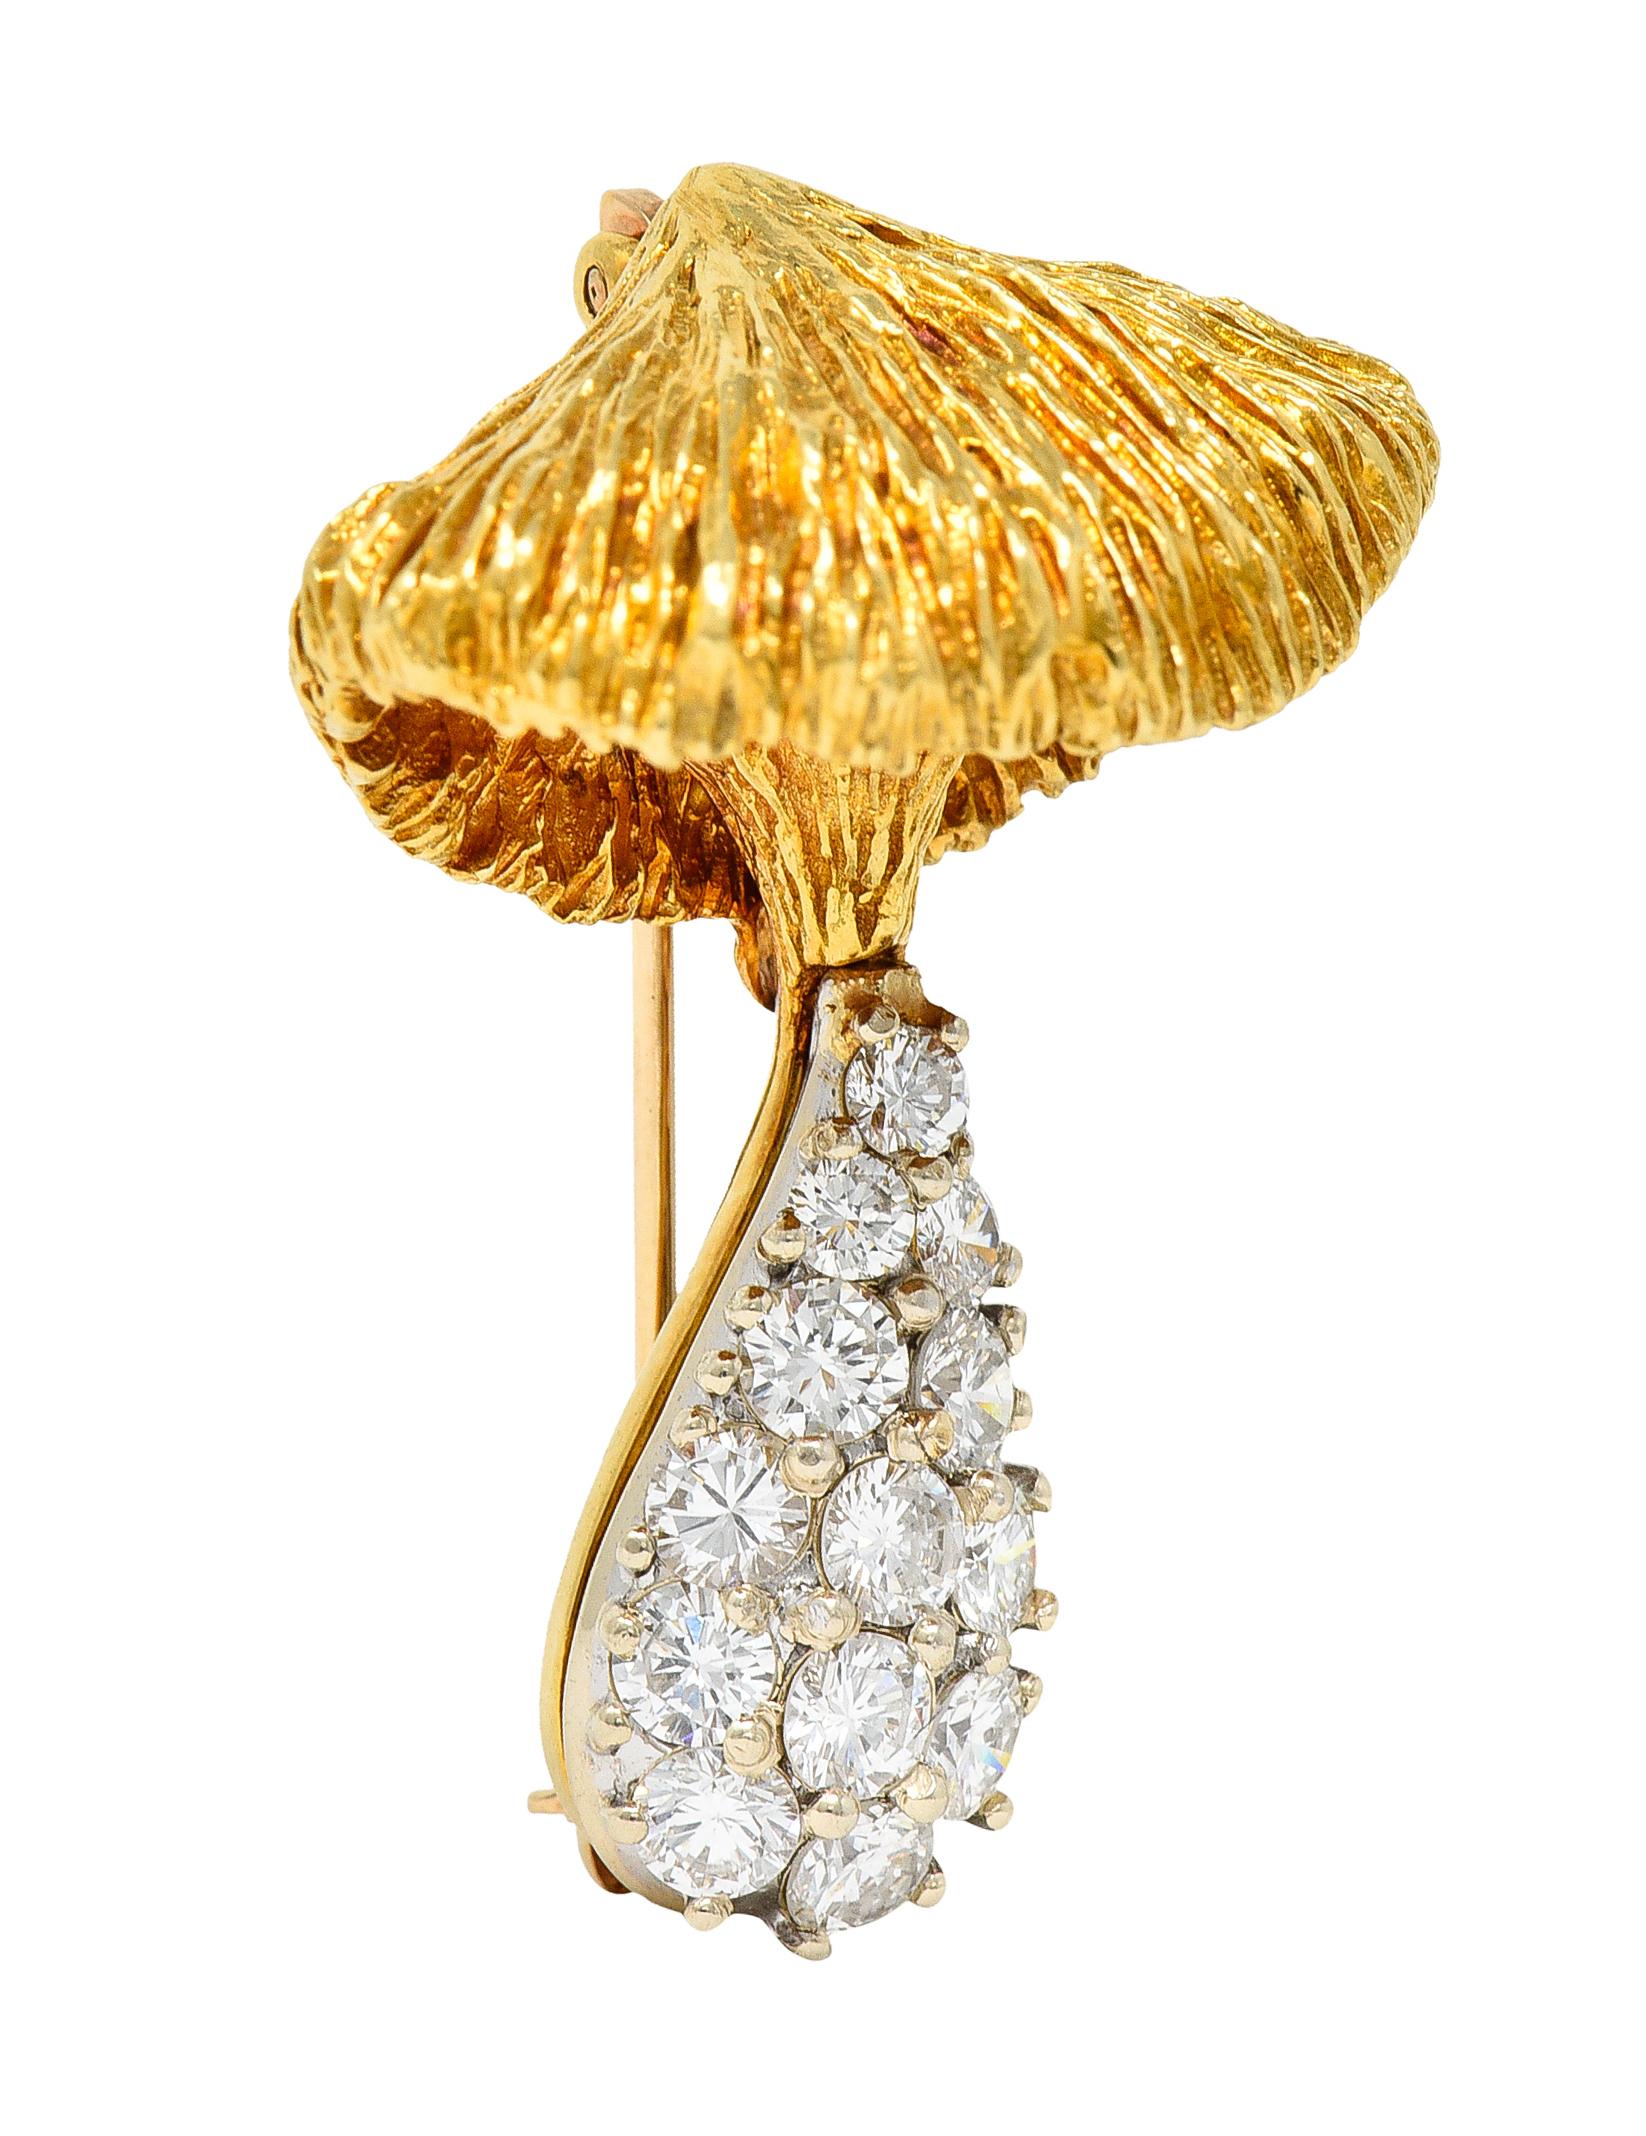 Designed as a stylized mushroom with a yellow gold top and white gold stem base

Top is dimensional and highly texturous while base is pavè set with round brilliant cut diamonds

Weighing in total approximately 1.25 carat with F to H color and VS